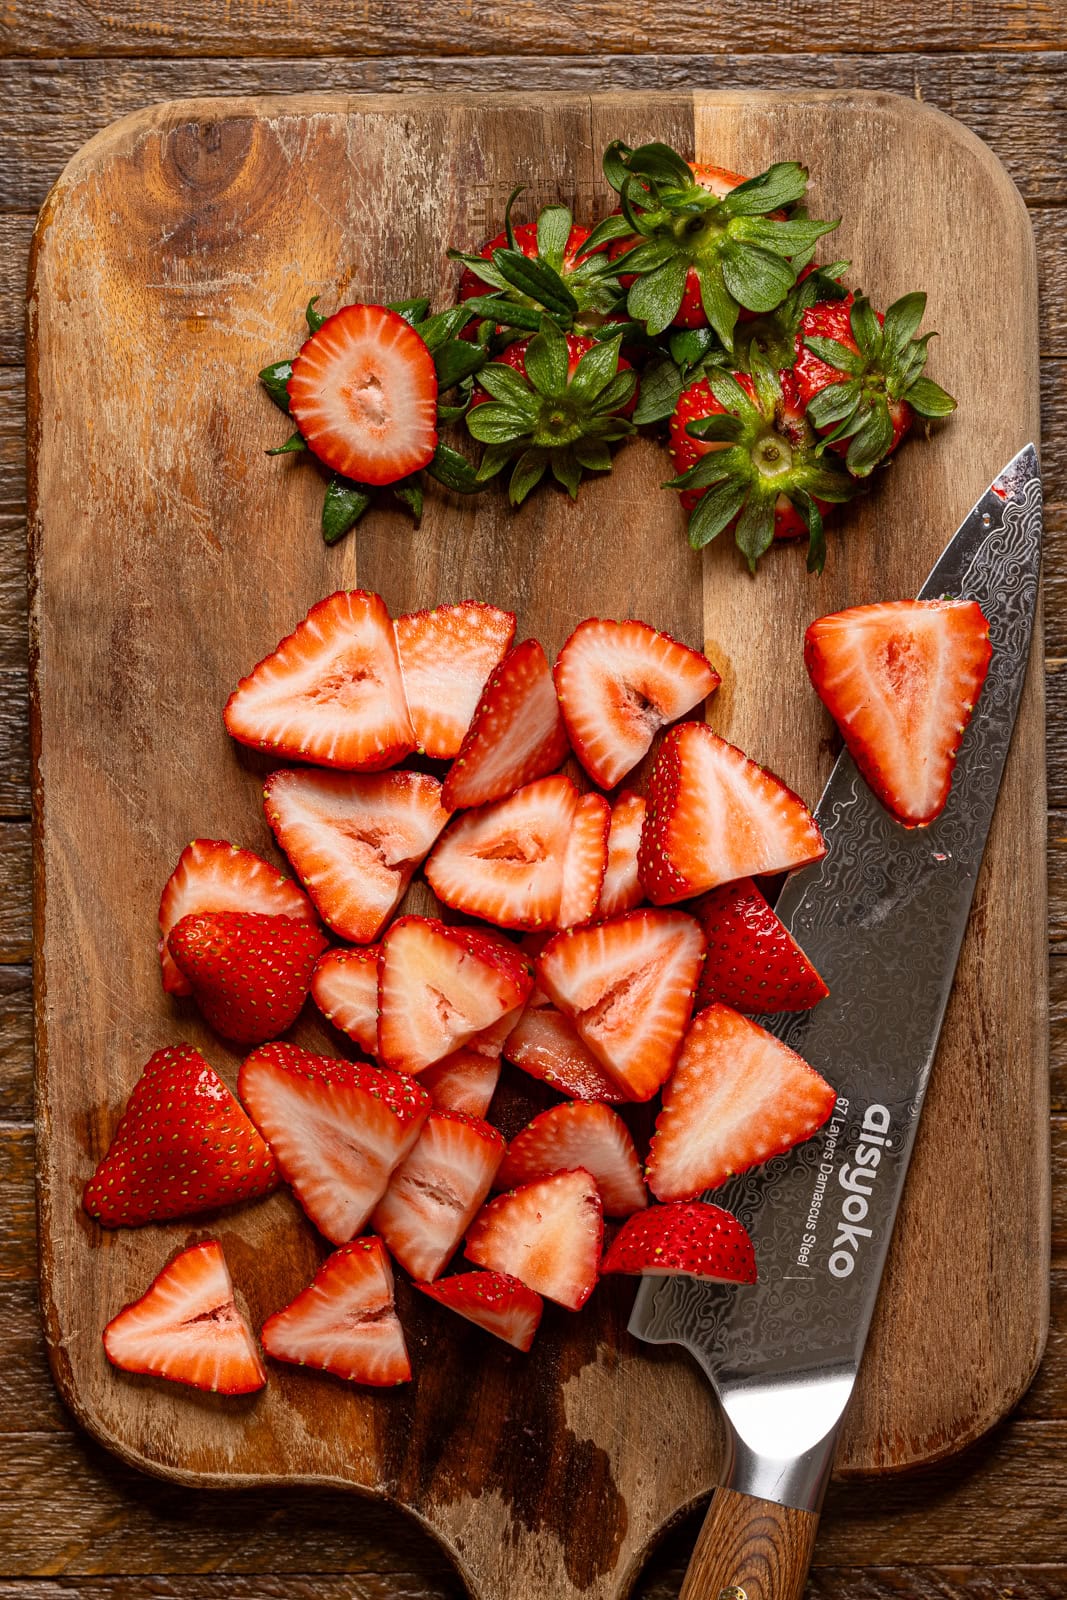 Sliced strawberries on a cutting board with a knife.